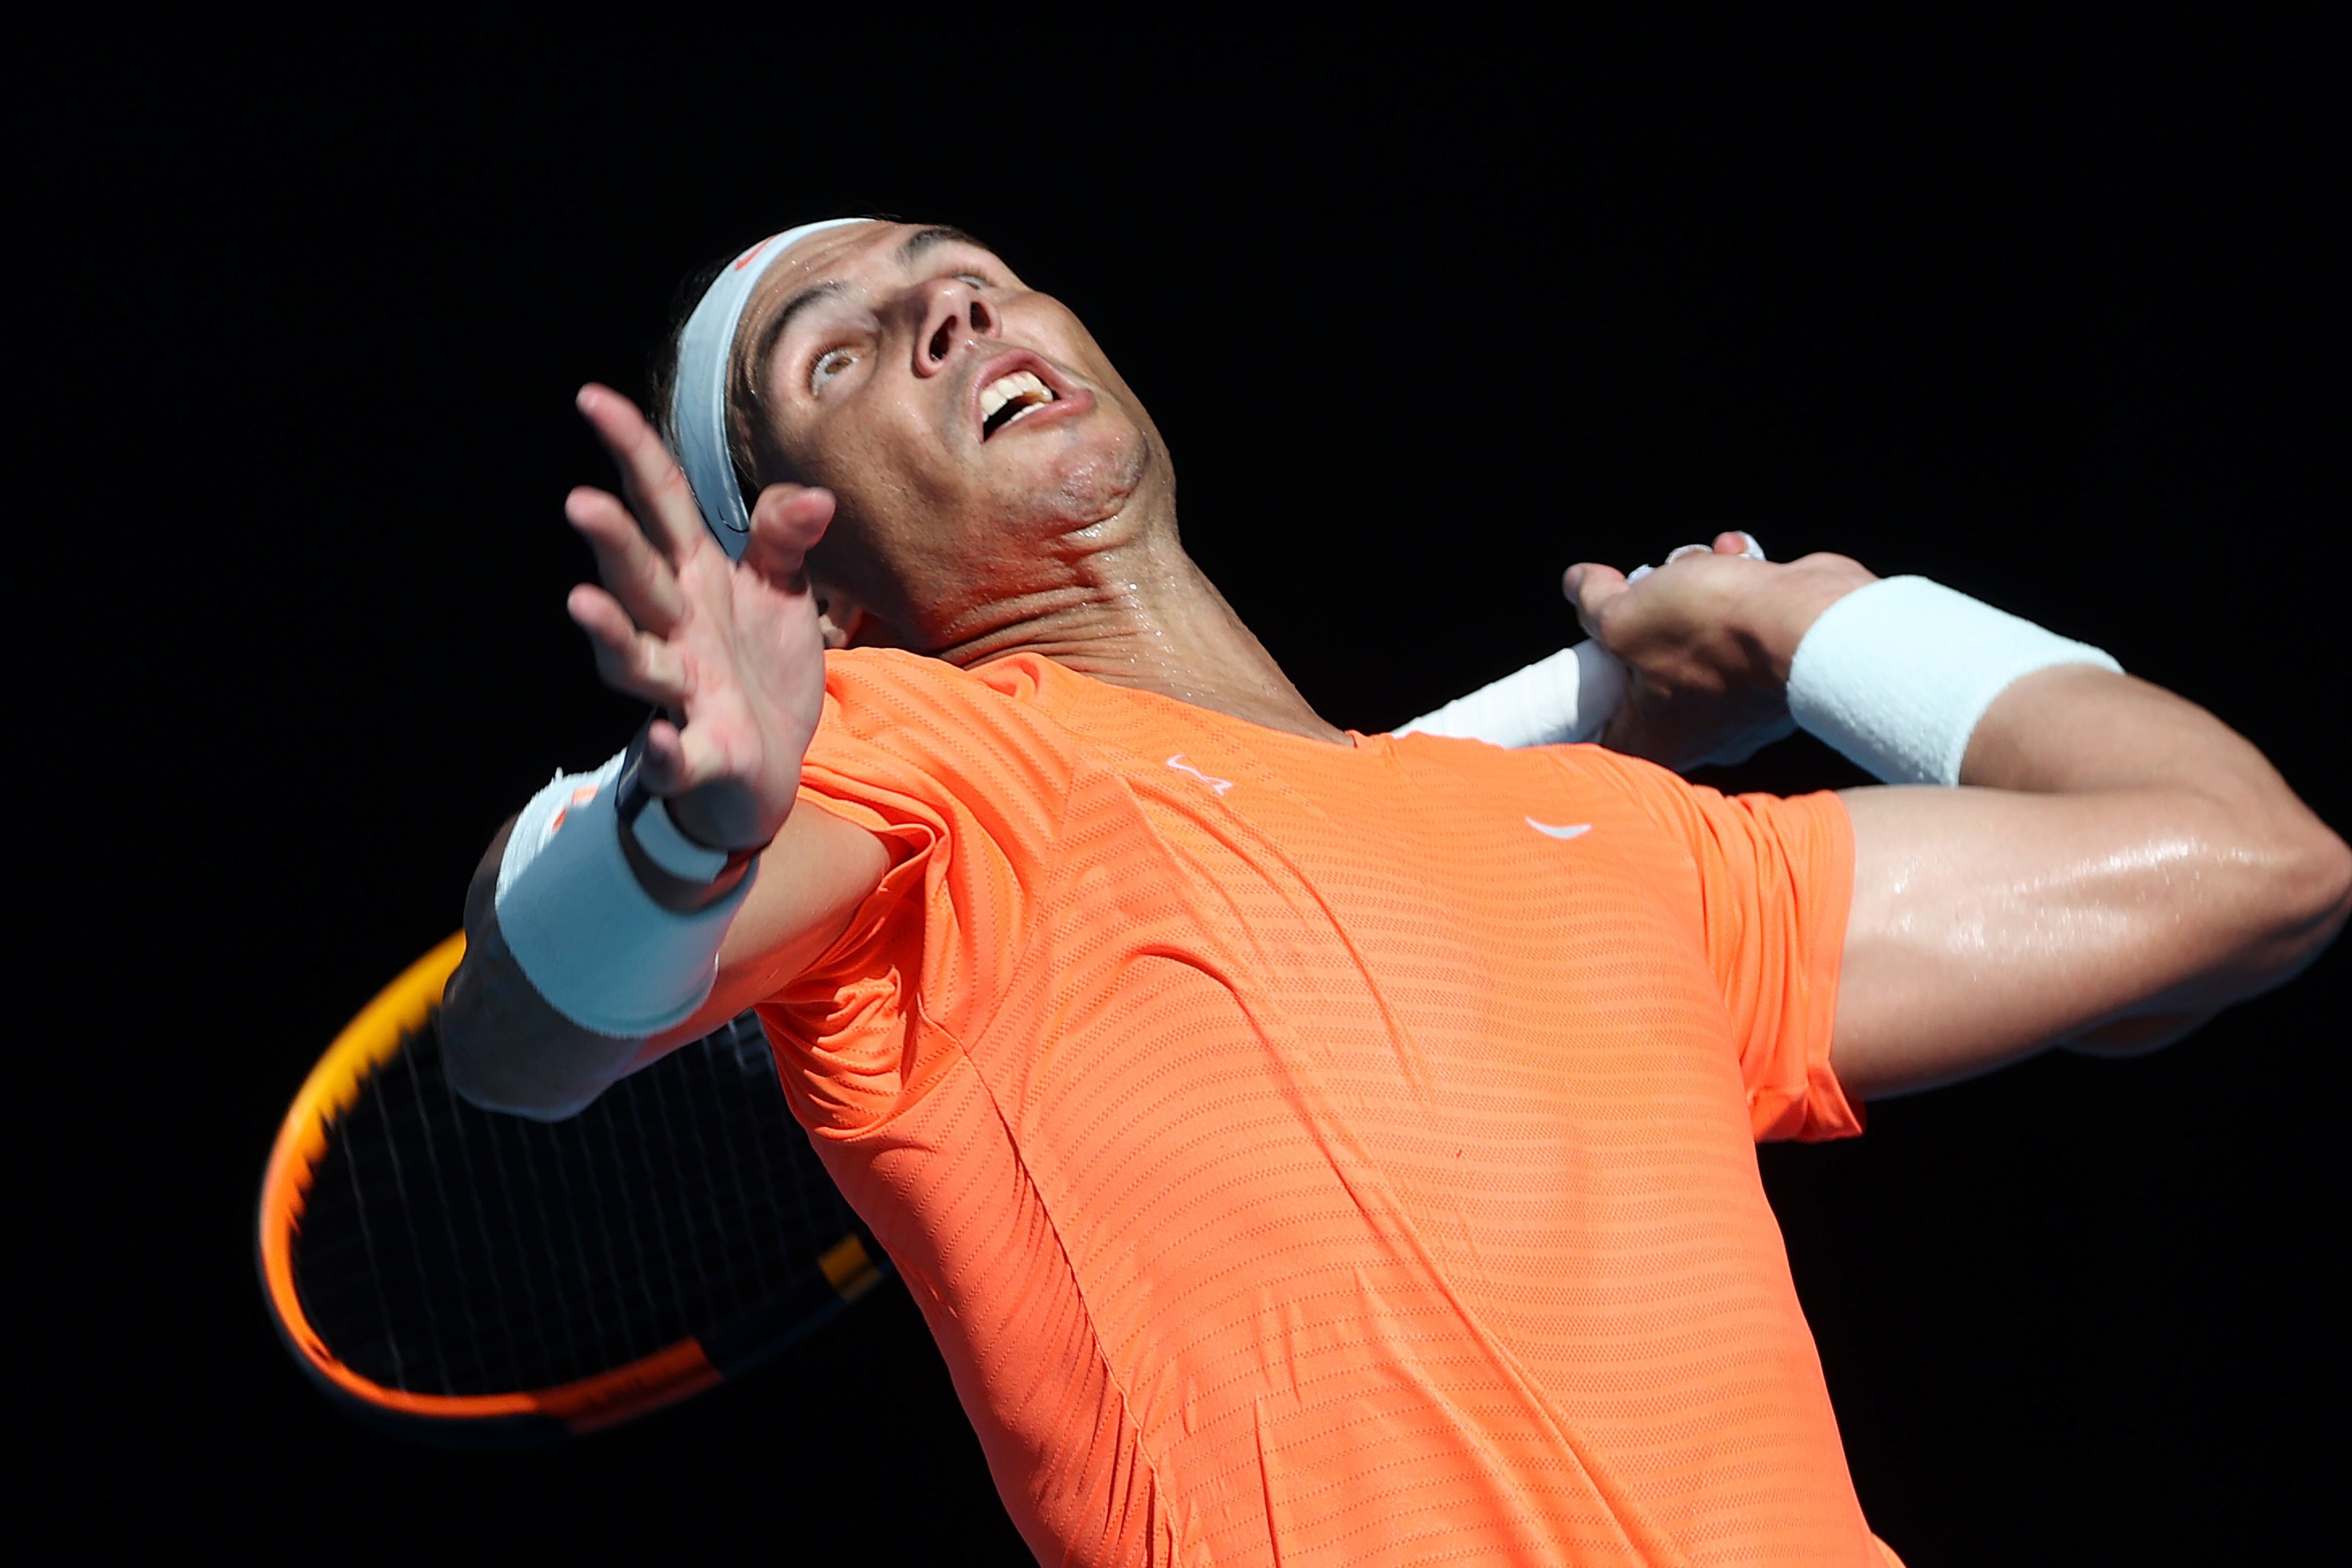 Rafael Nadal serves against Italy’s Fabio Fognini during their men's singles match on day eight of the Australian Open. Photo: AFP